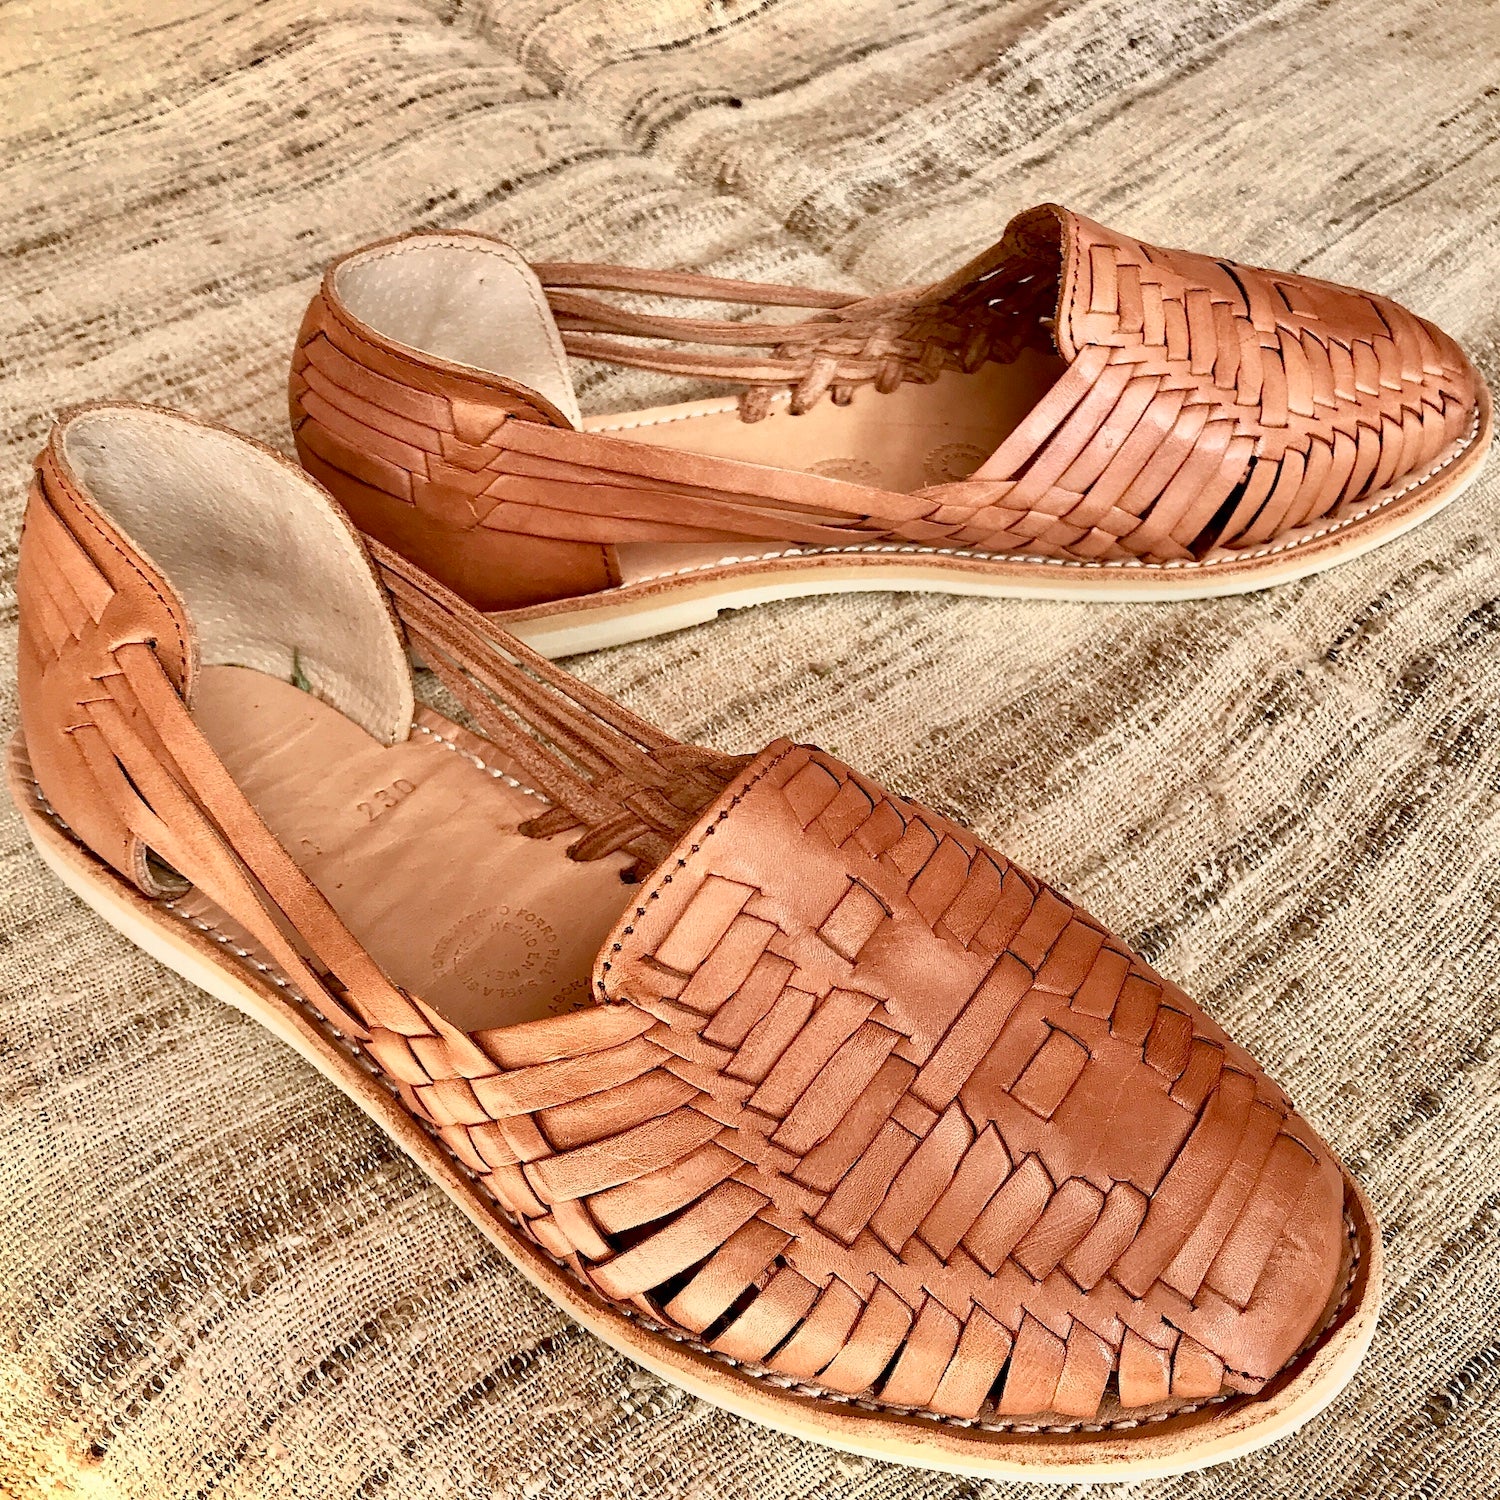 Handmade Traditional Leather Shoes – Primitive Tribal Craft